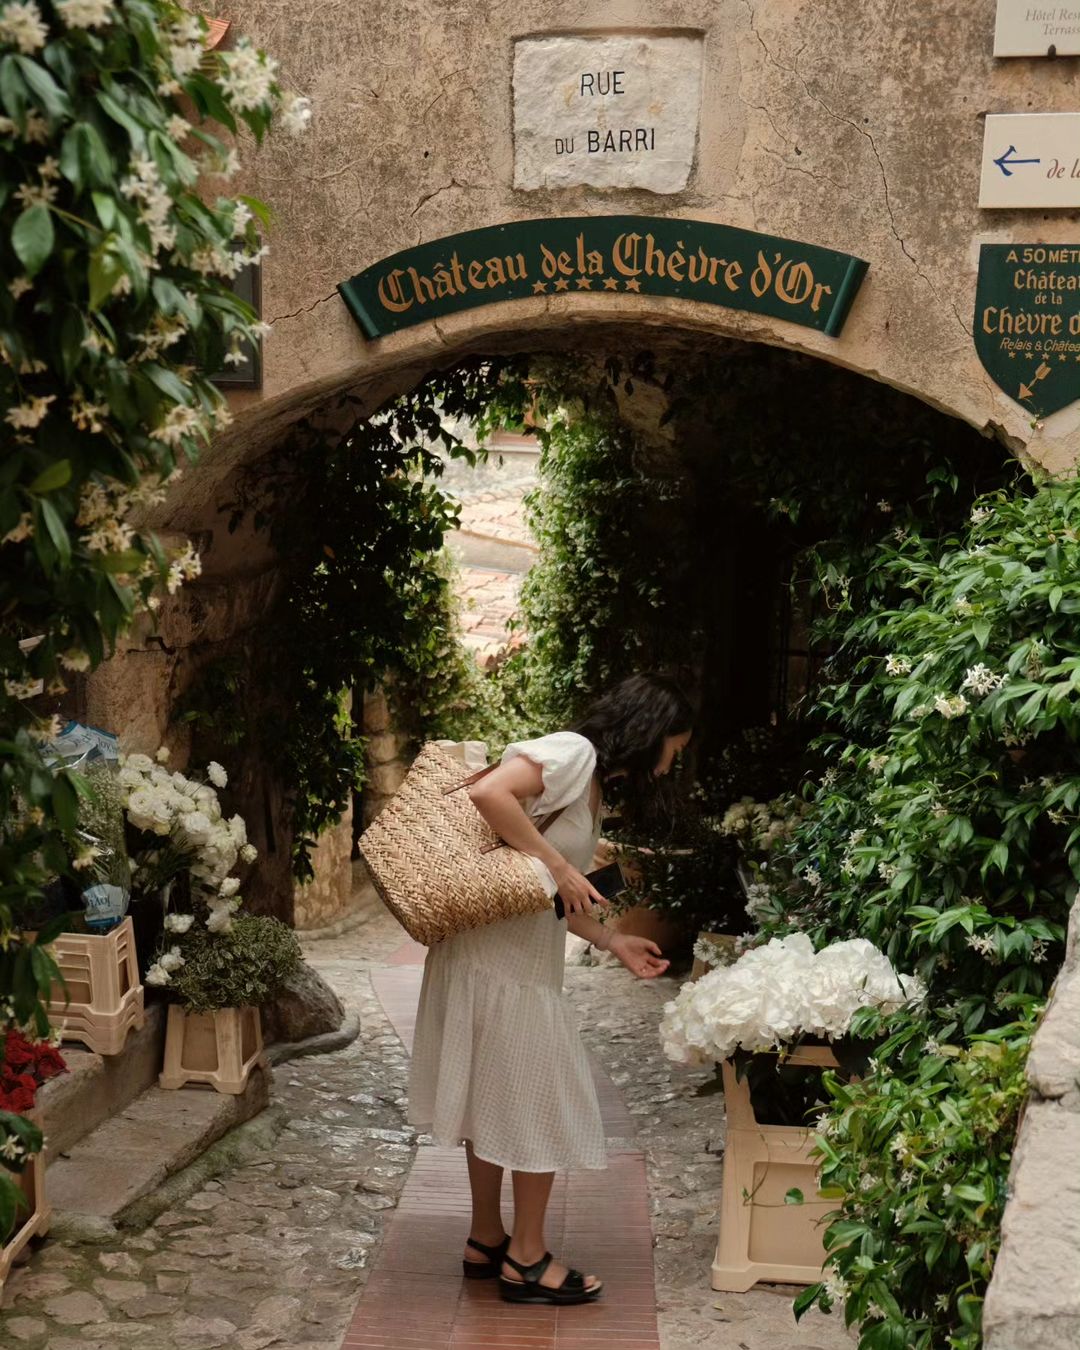 The incredibly picturesque village of Eze - Best Outdoor Restaurants in Europe